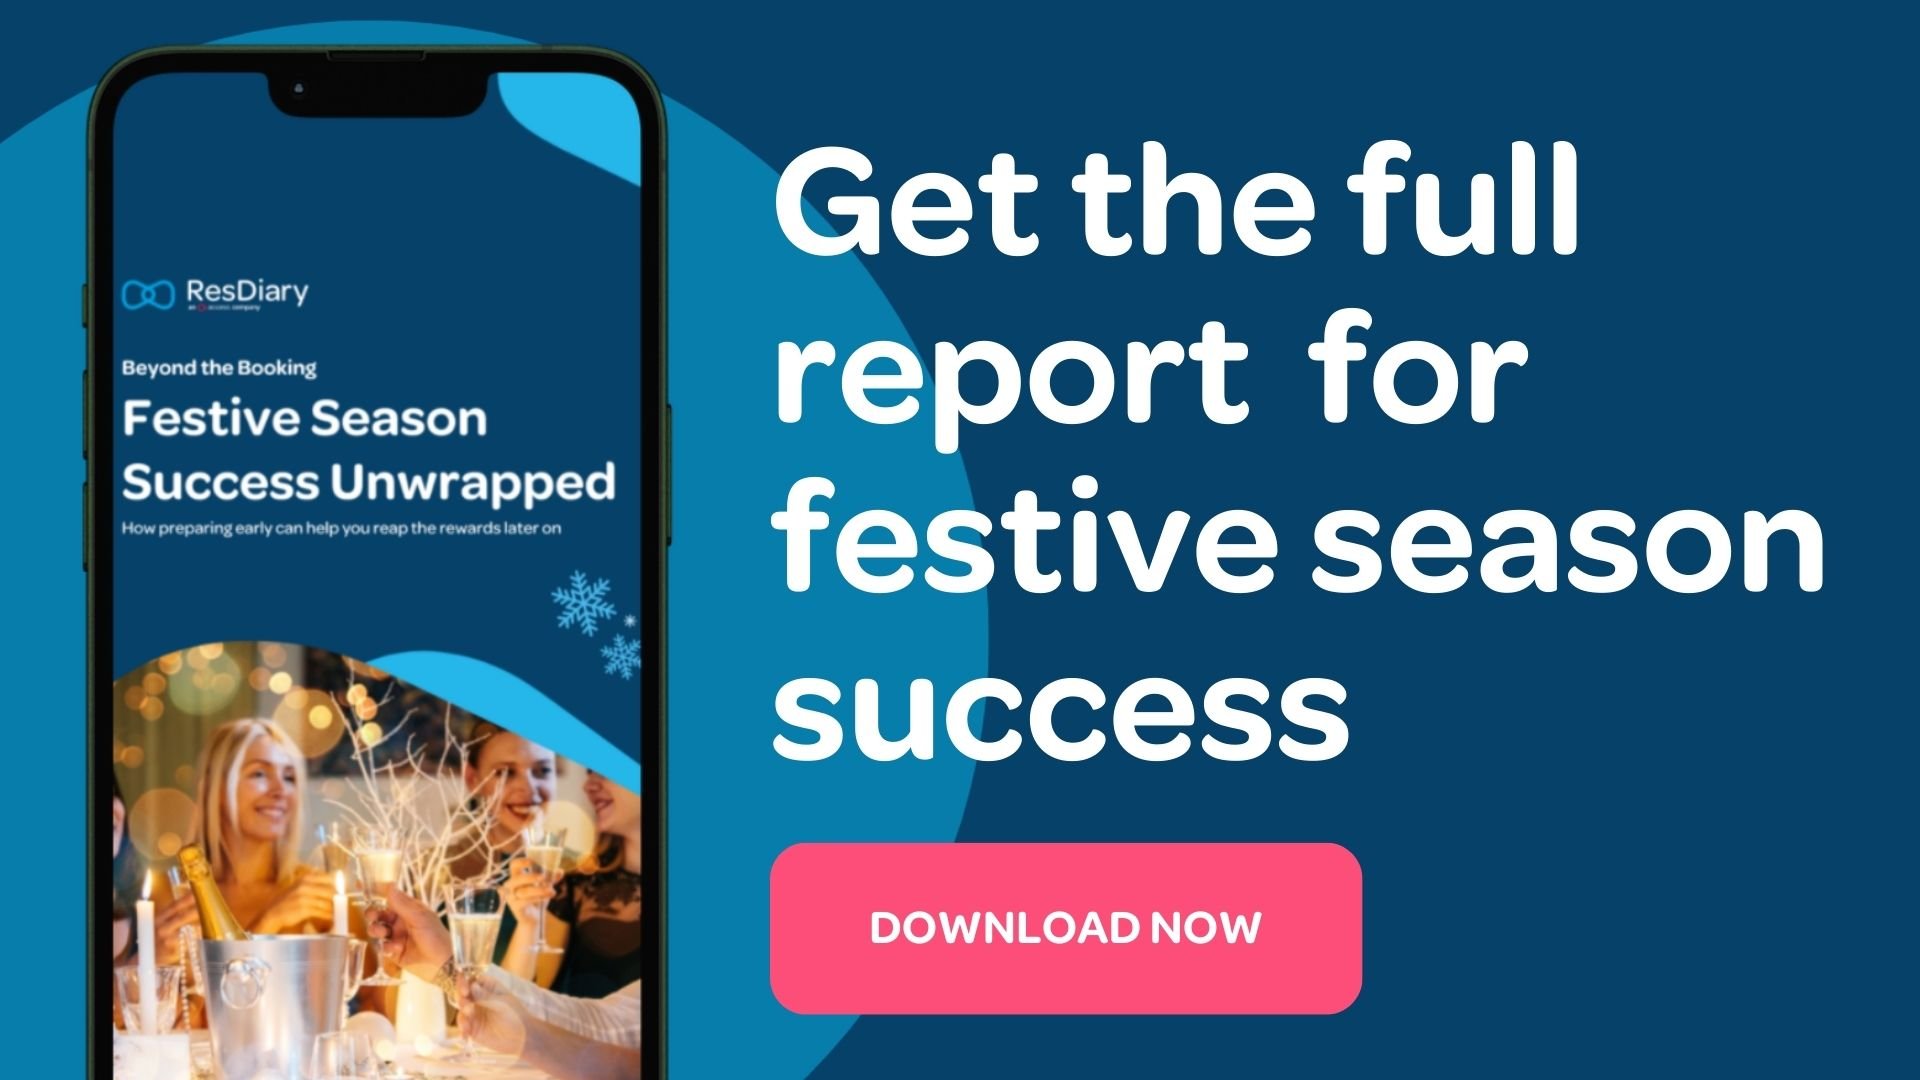 Call to action to download the ResDiary festive season hospitality industry report